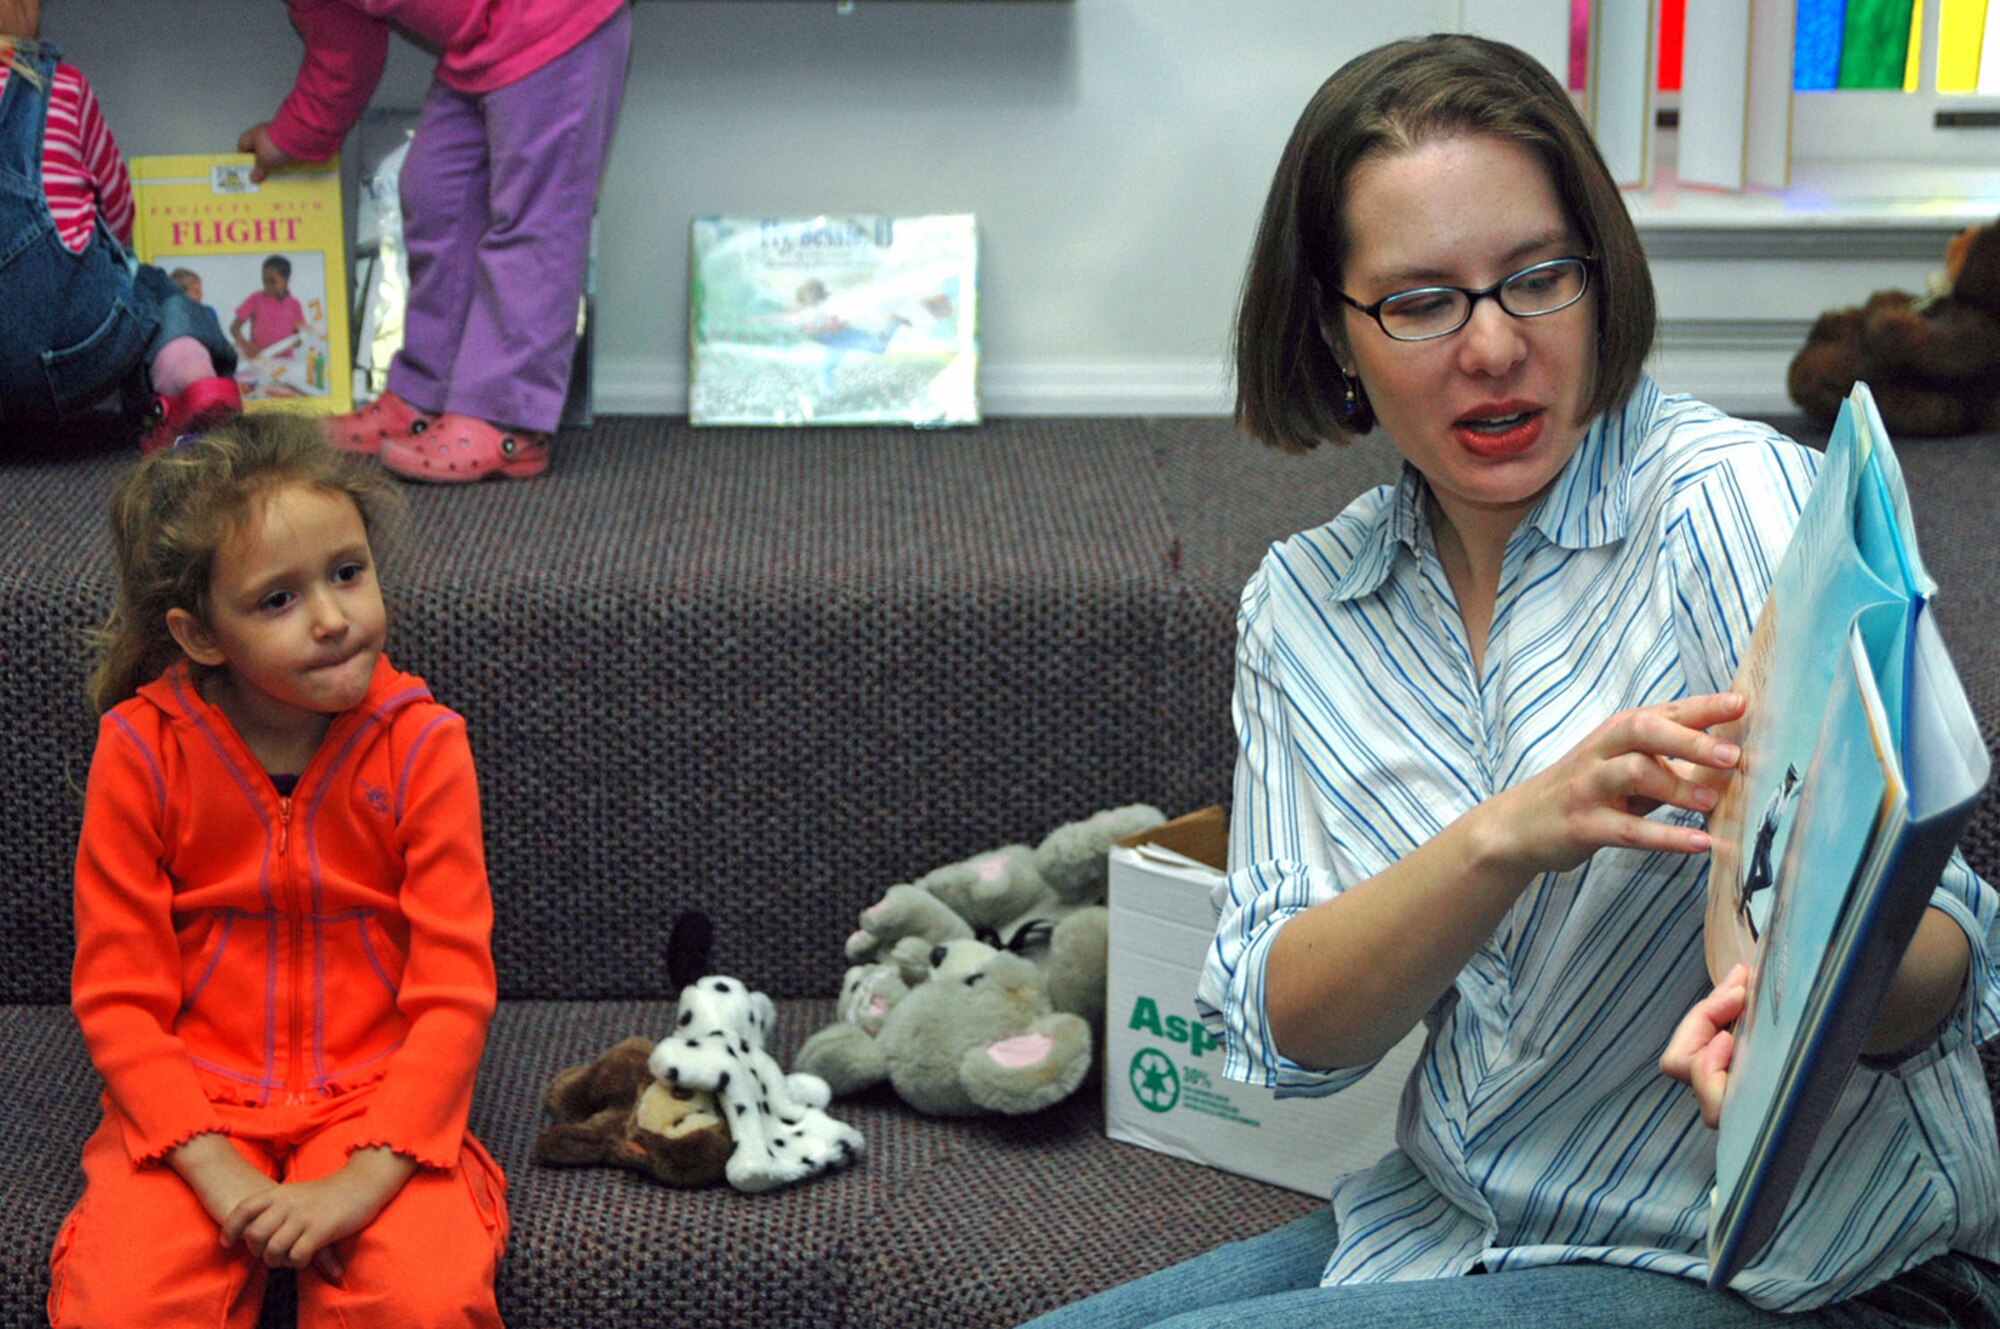 Katelyn Mann listens to a story about Orville and Wilbur Wright during storytime in the Warren library Nov. 3. Children's Story Hour is held every Friday at 11 a.m. in the base library and includes reading and other activities for children.